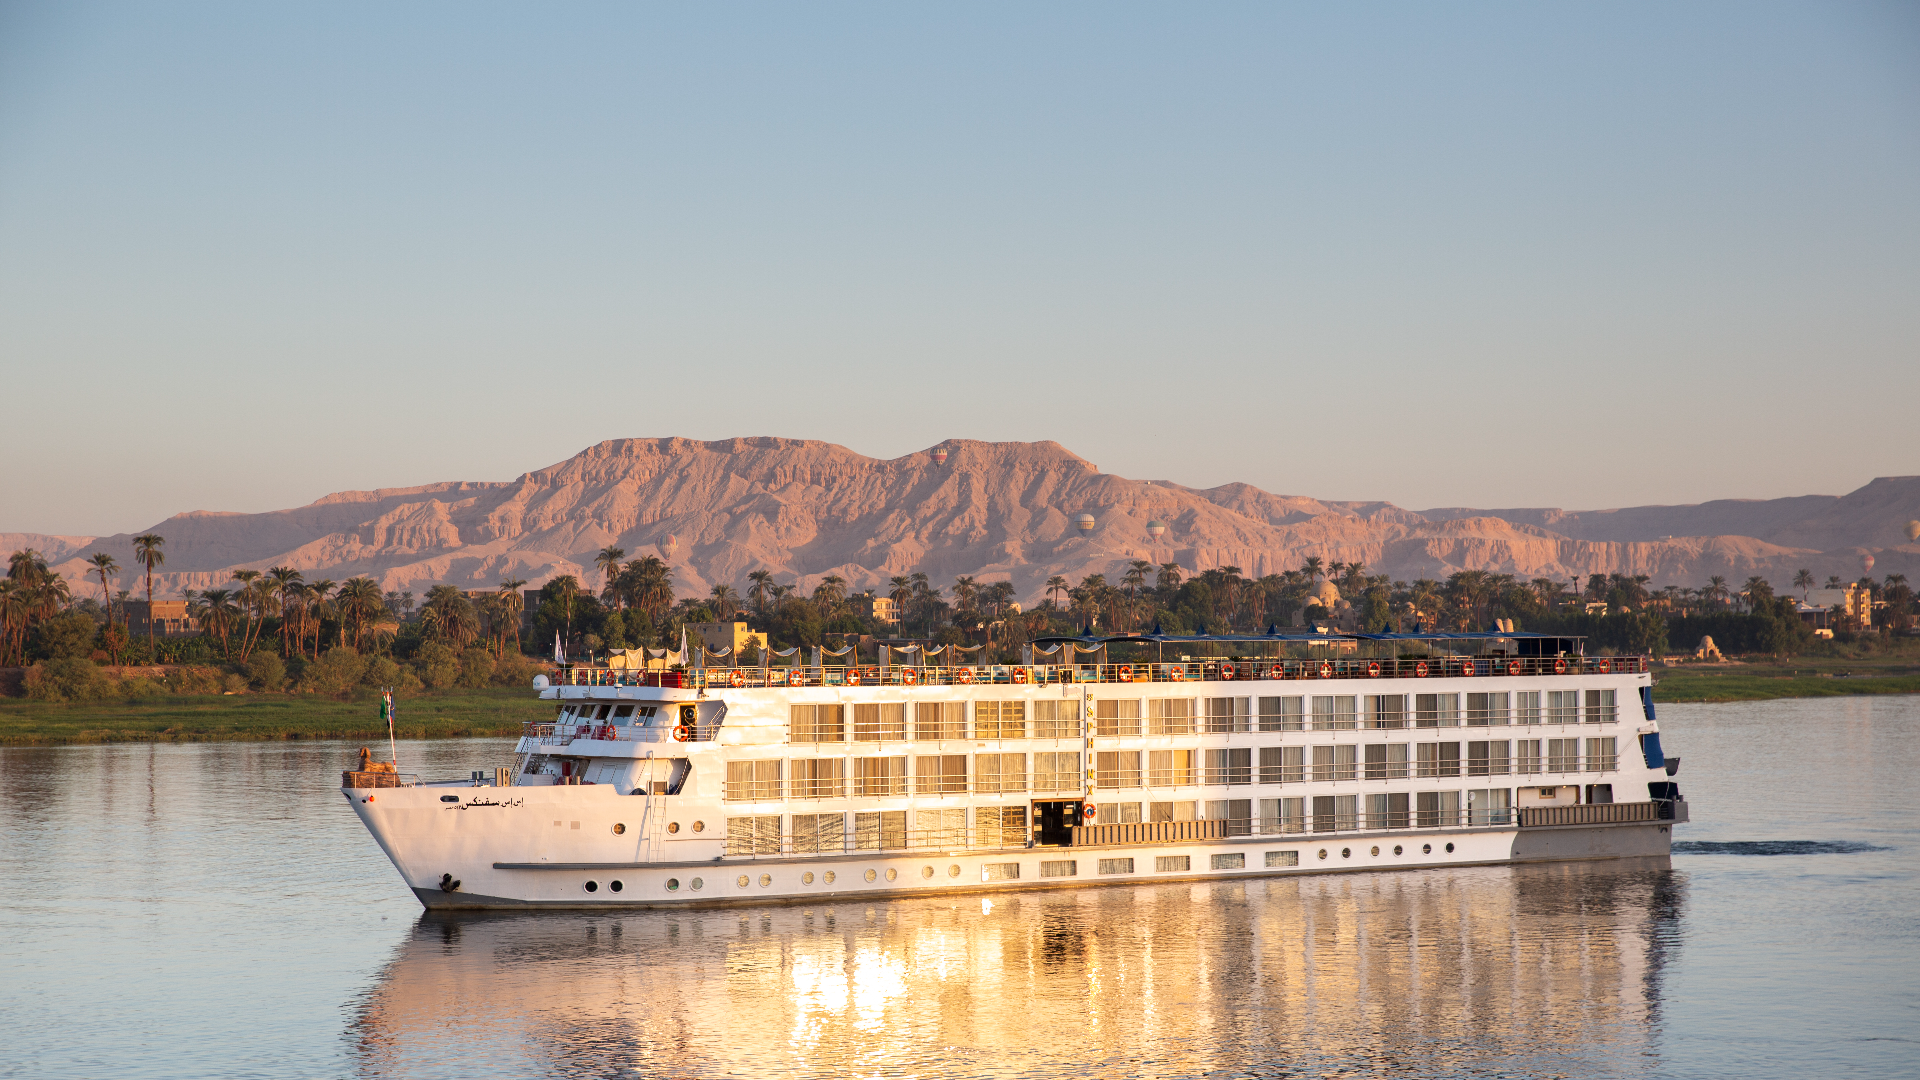 S.S. Sphinx on the picturesque Nile, Egypt